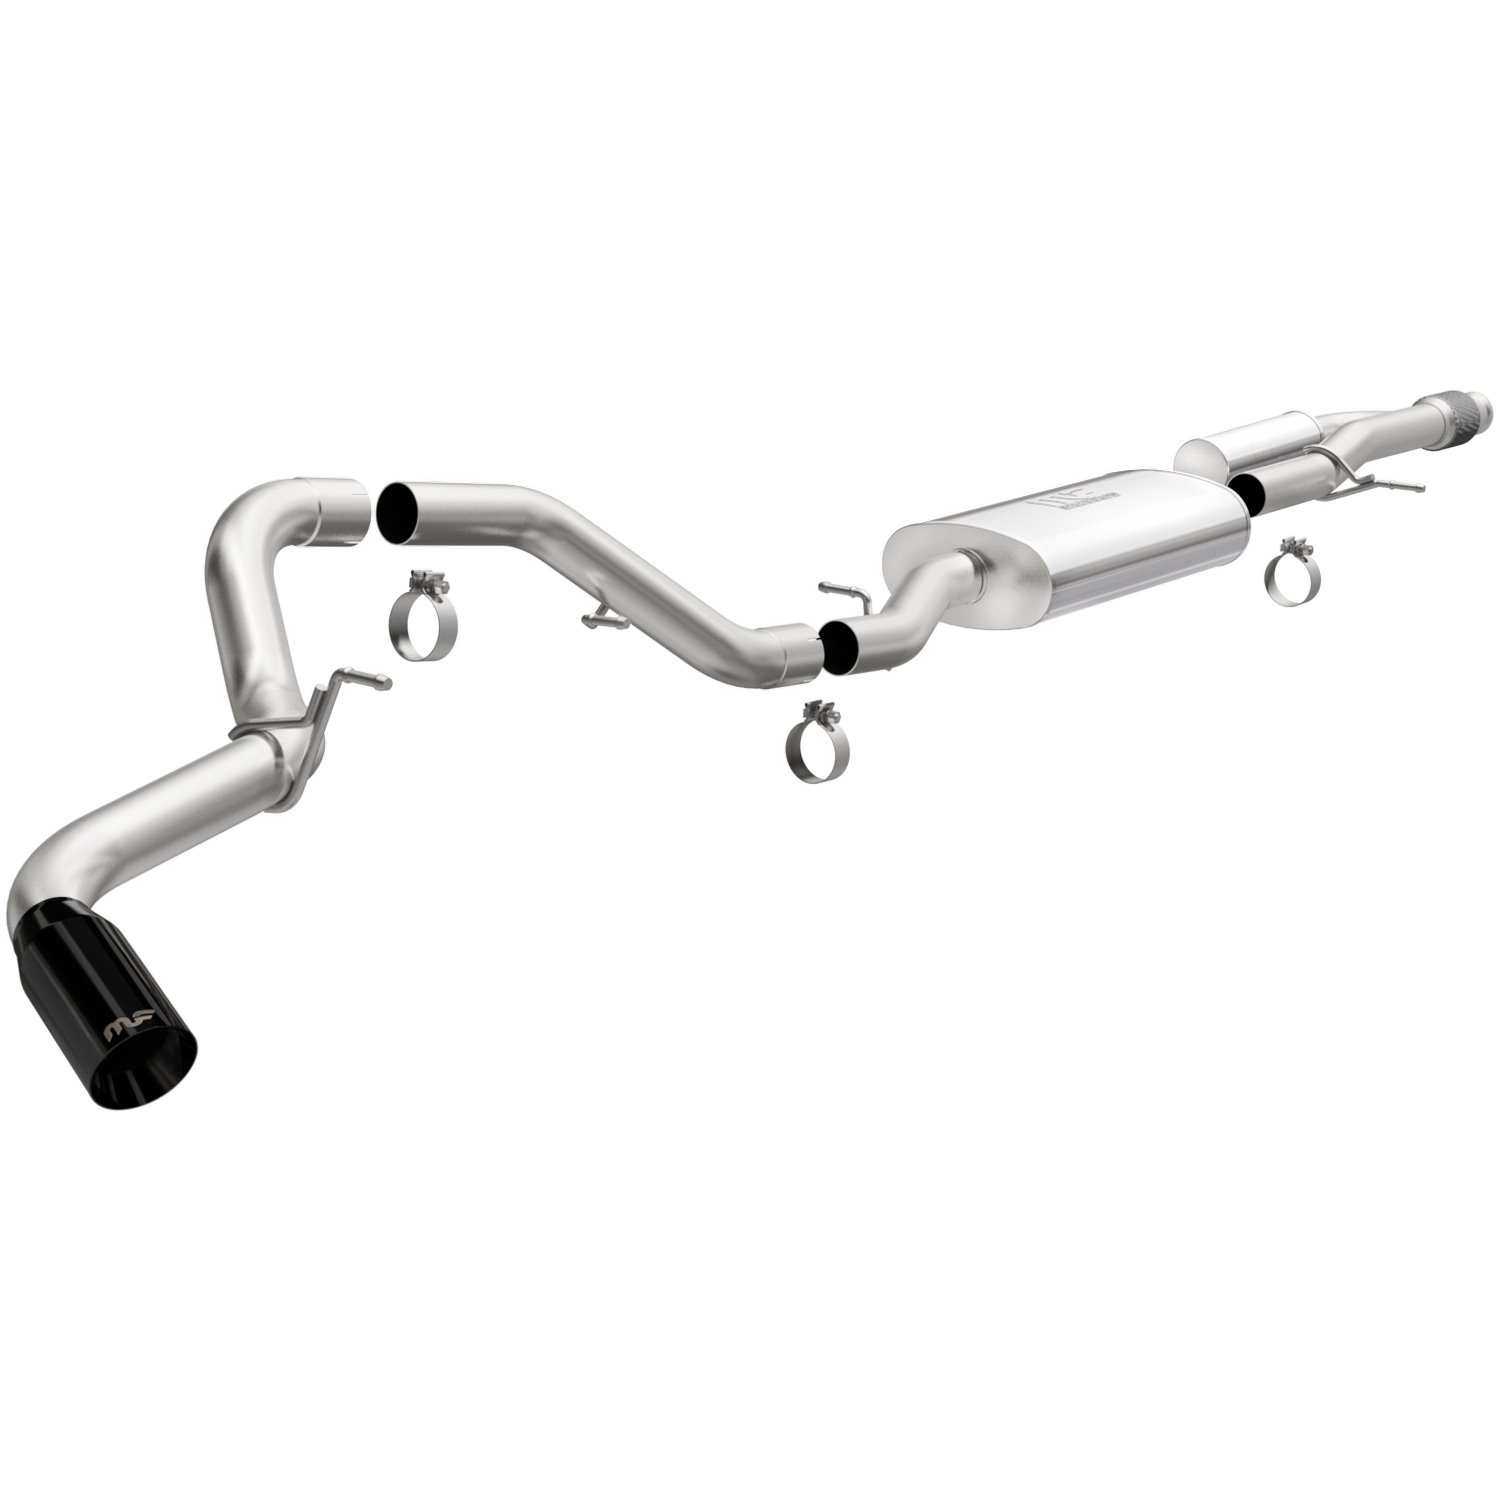 Street Series Cat-Back Exhaust System Fits Select Late-Model Chevy Suburban, GMC Yukon XL 5.3L V8